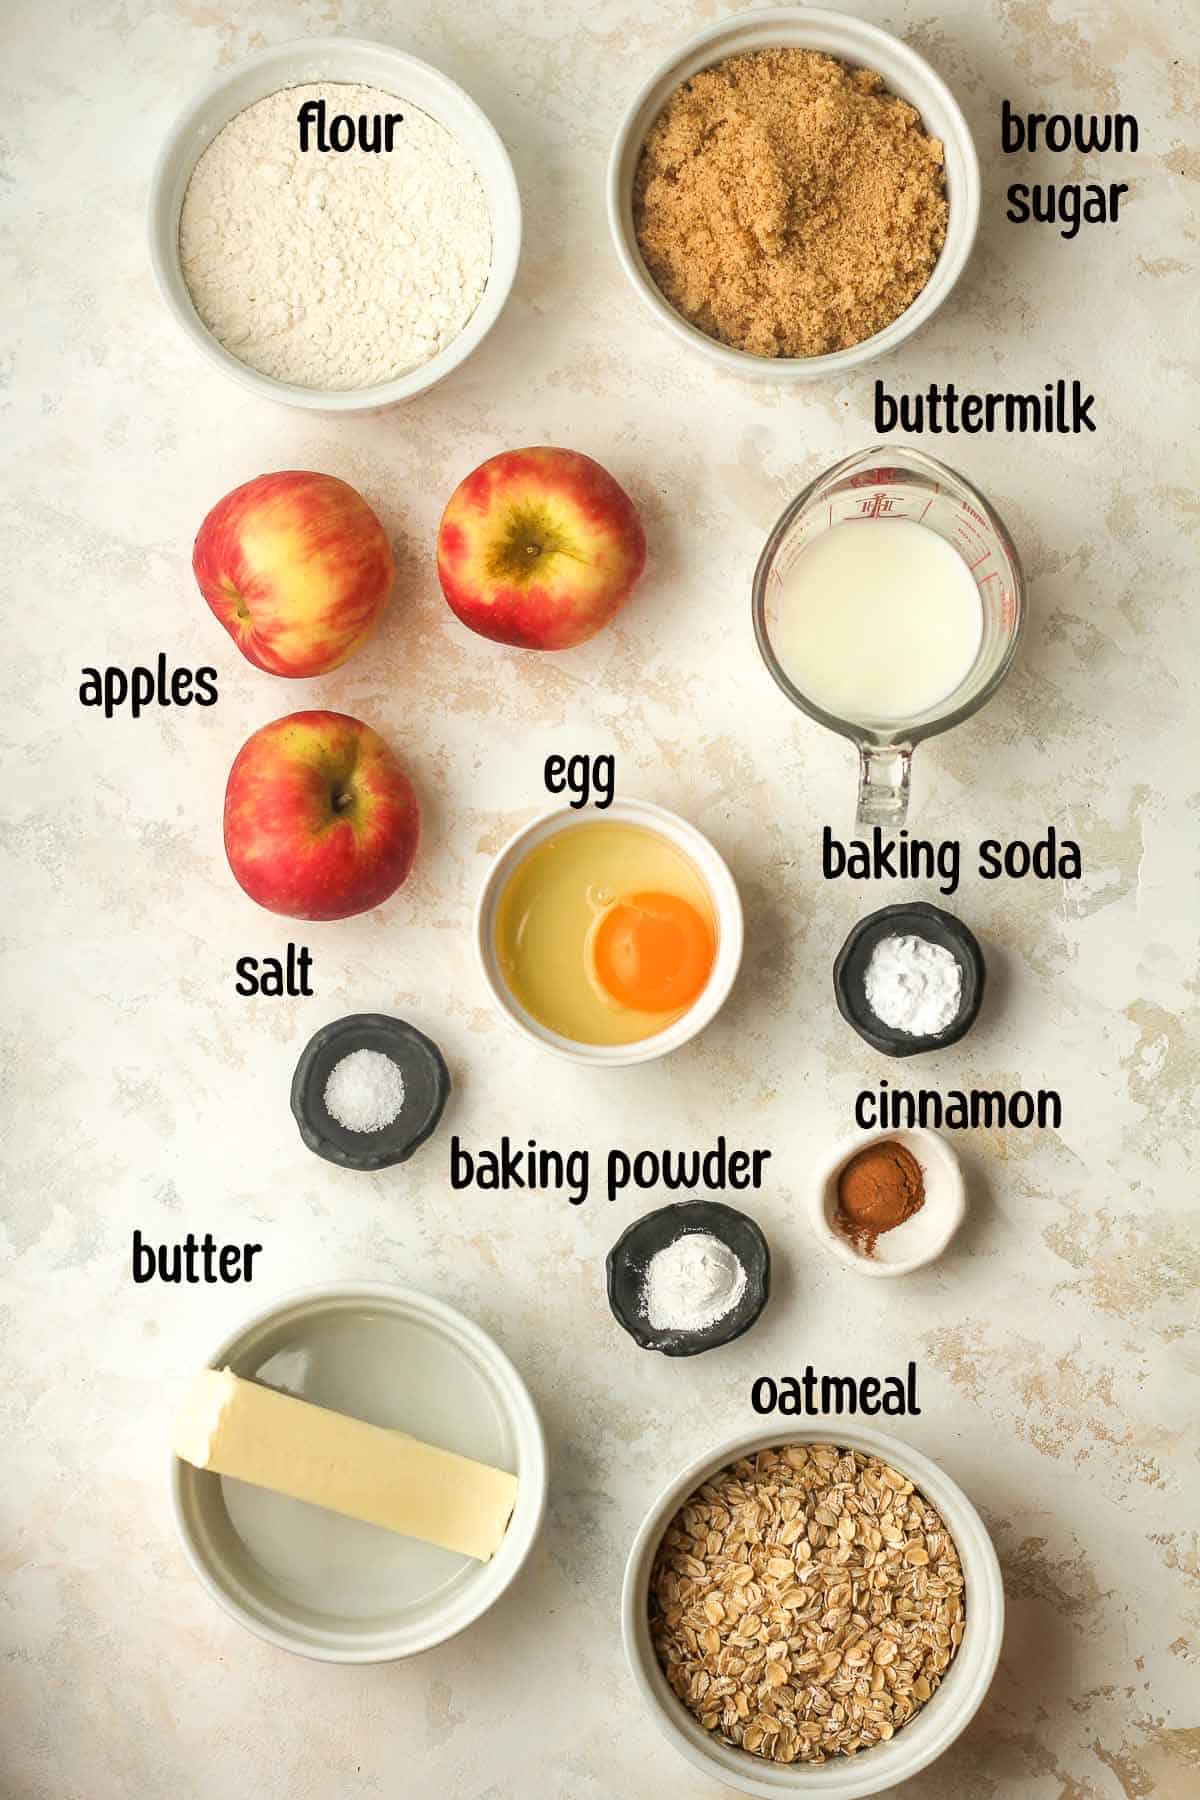 Ingredients for the apple streusel cake.